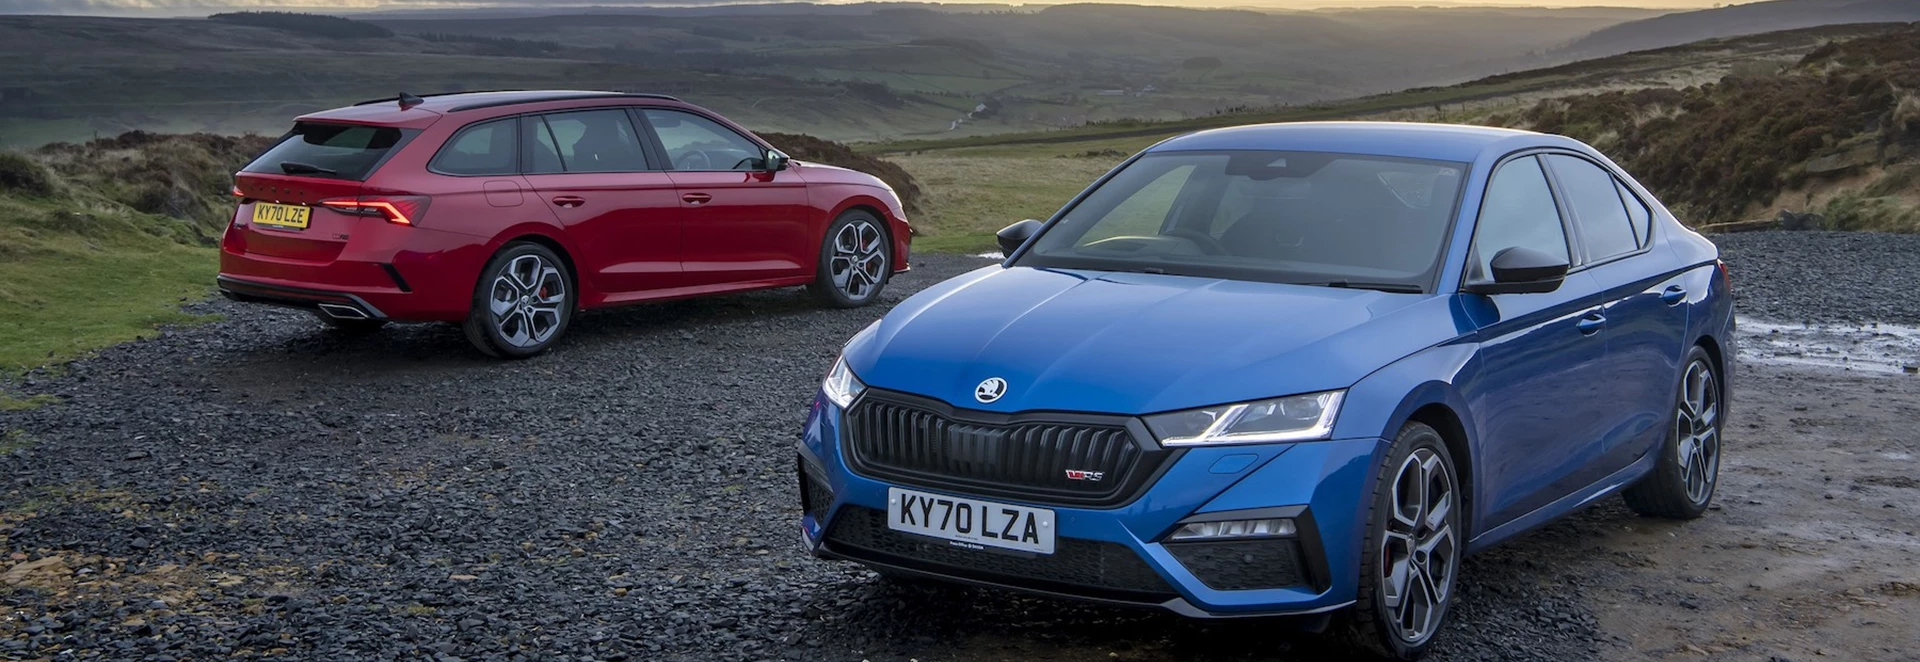 Skoda finance offers: Here’s what’s available 